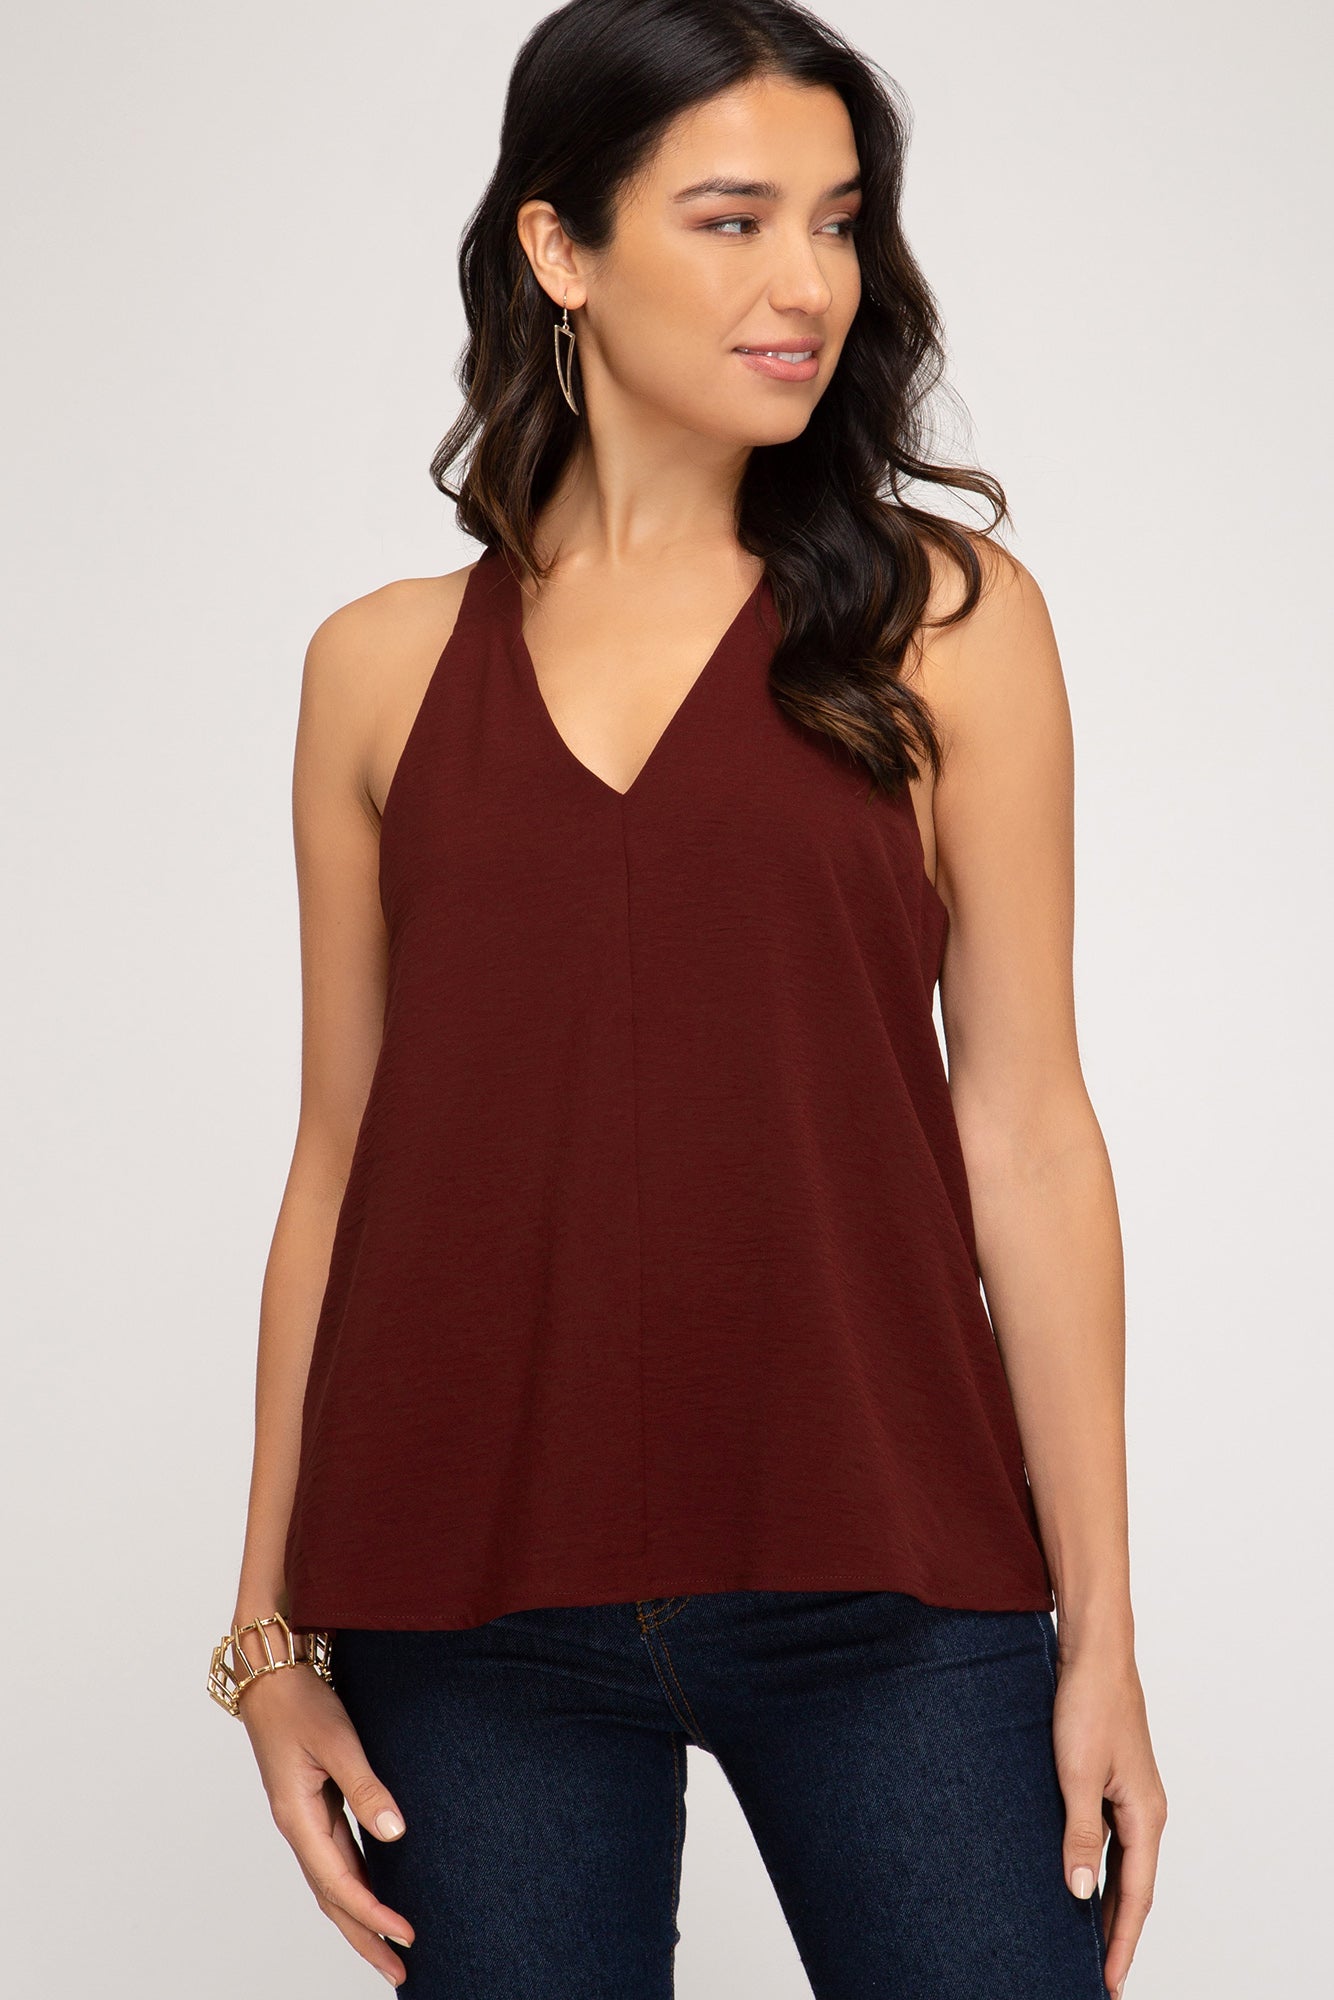 Sleeveless Blouse Top With Cross Detail!